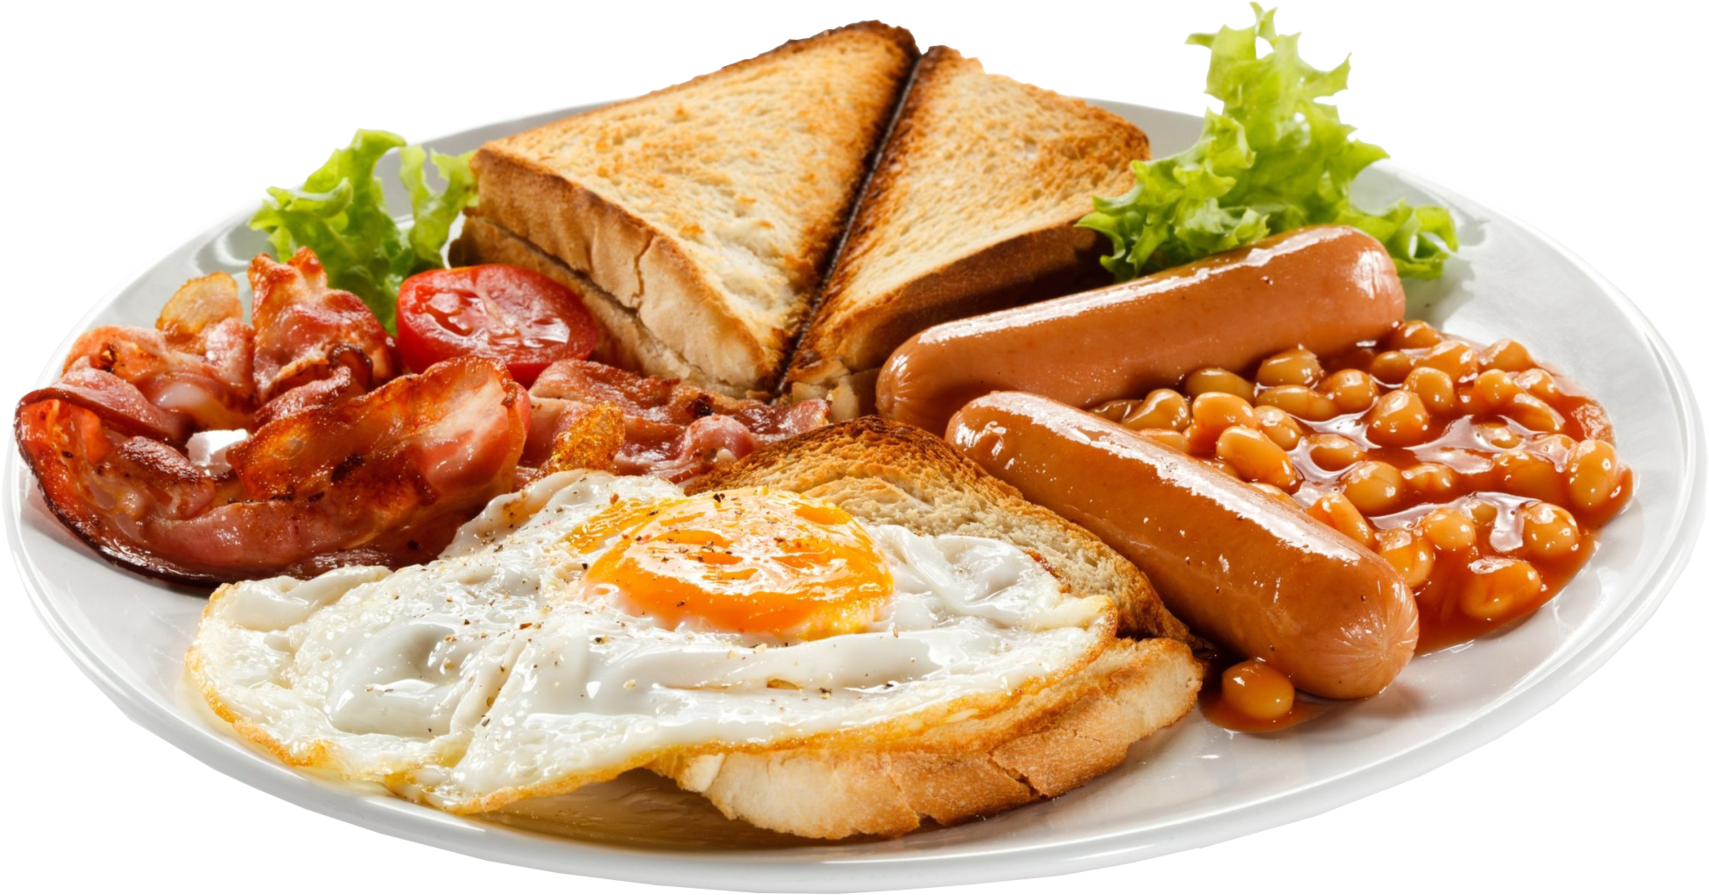 A Plate Of Breakfast With A Fried Egg And Beans